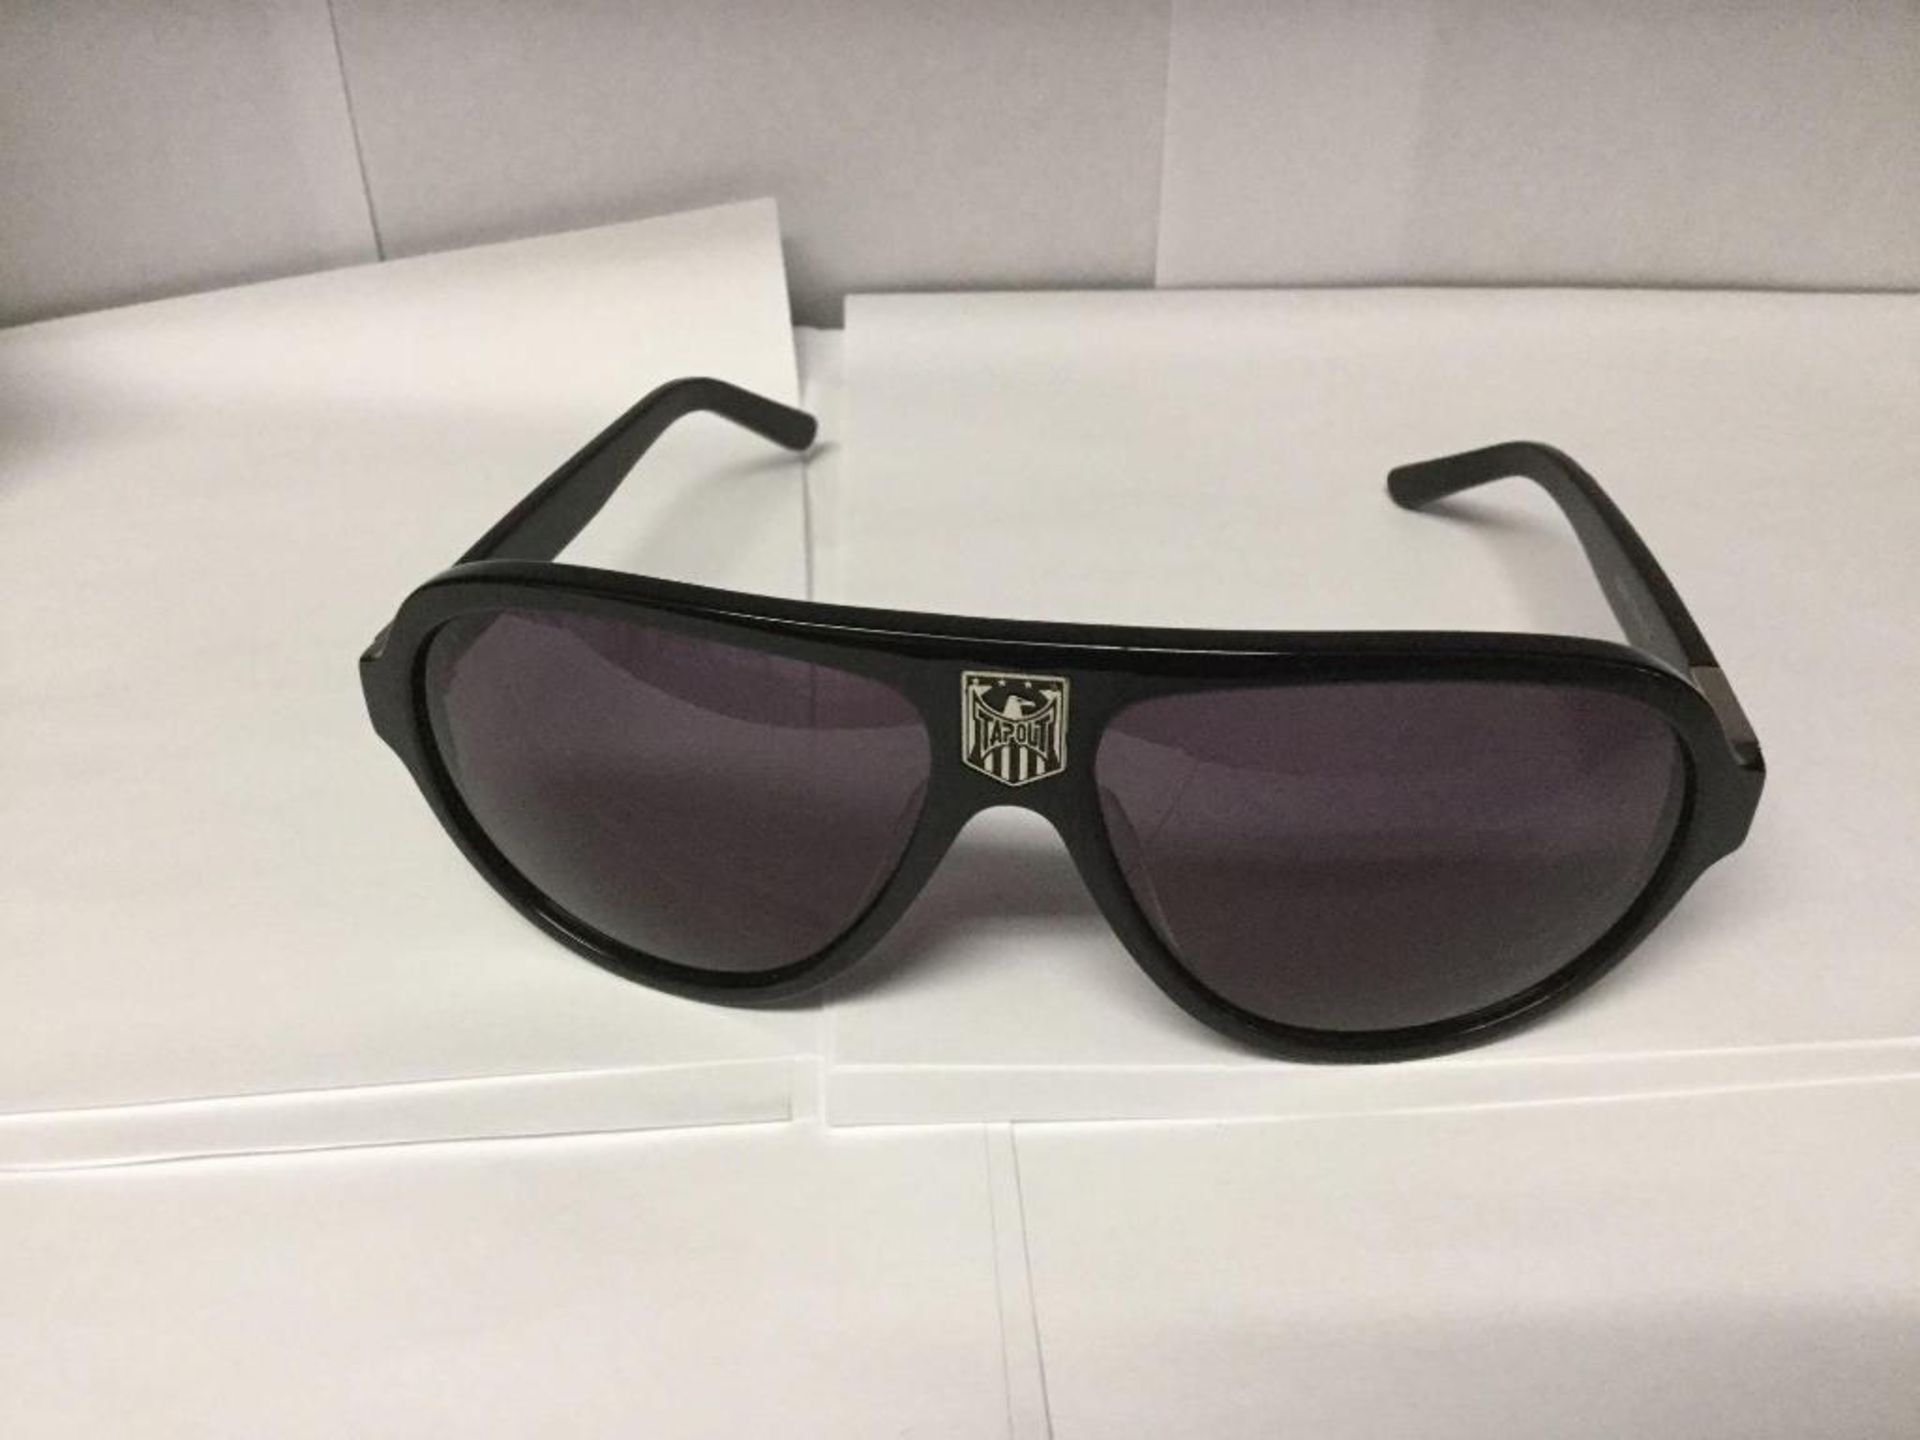 Tapout Eyewear Sunglasses with box and bag - Image 2 of 2